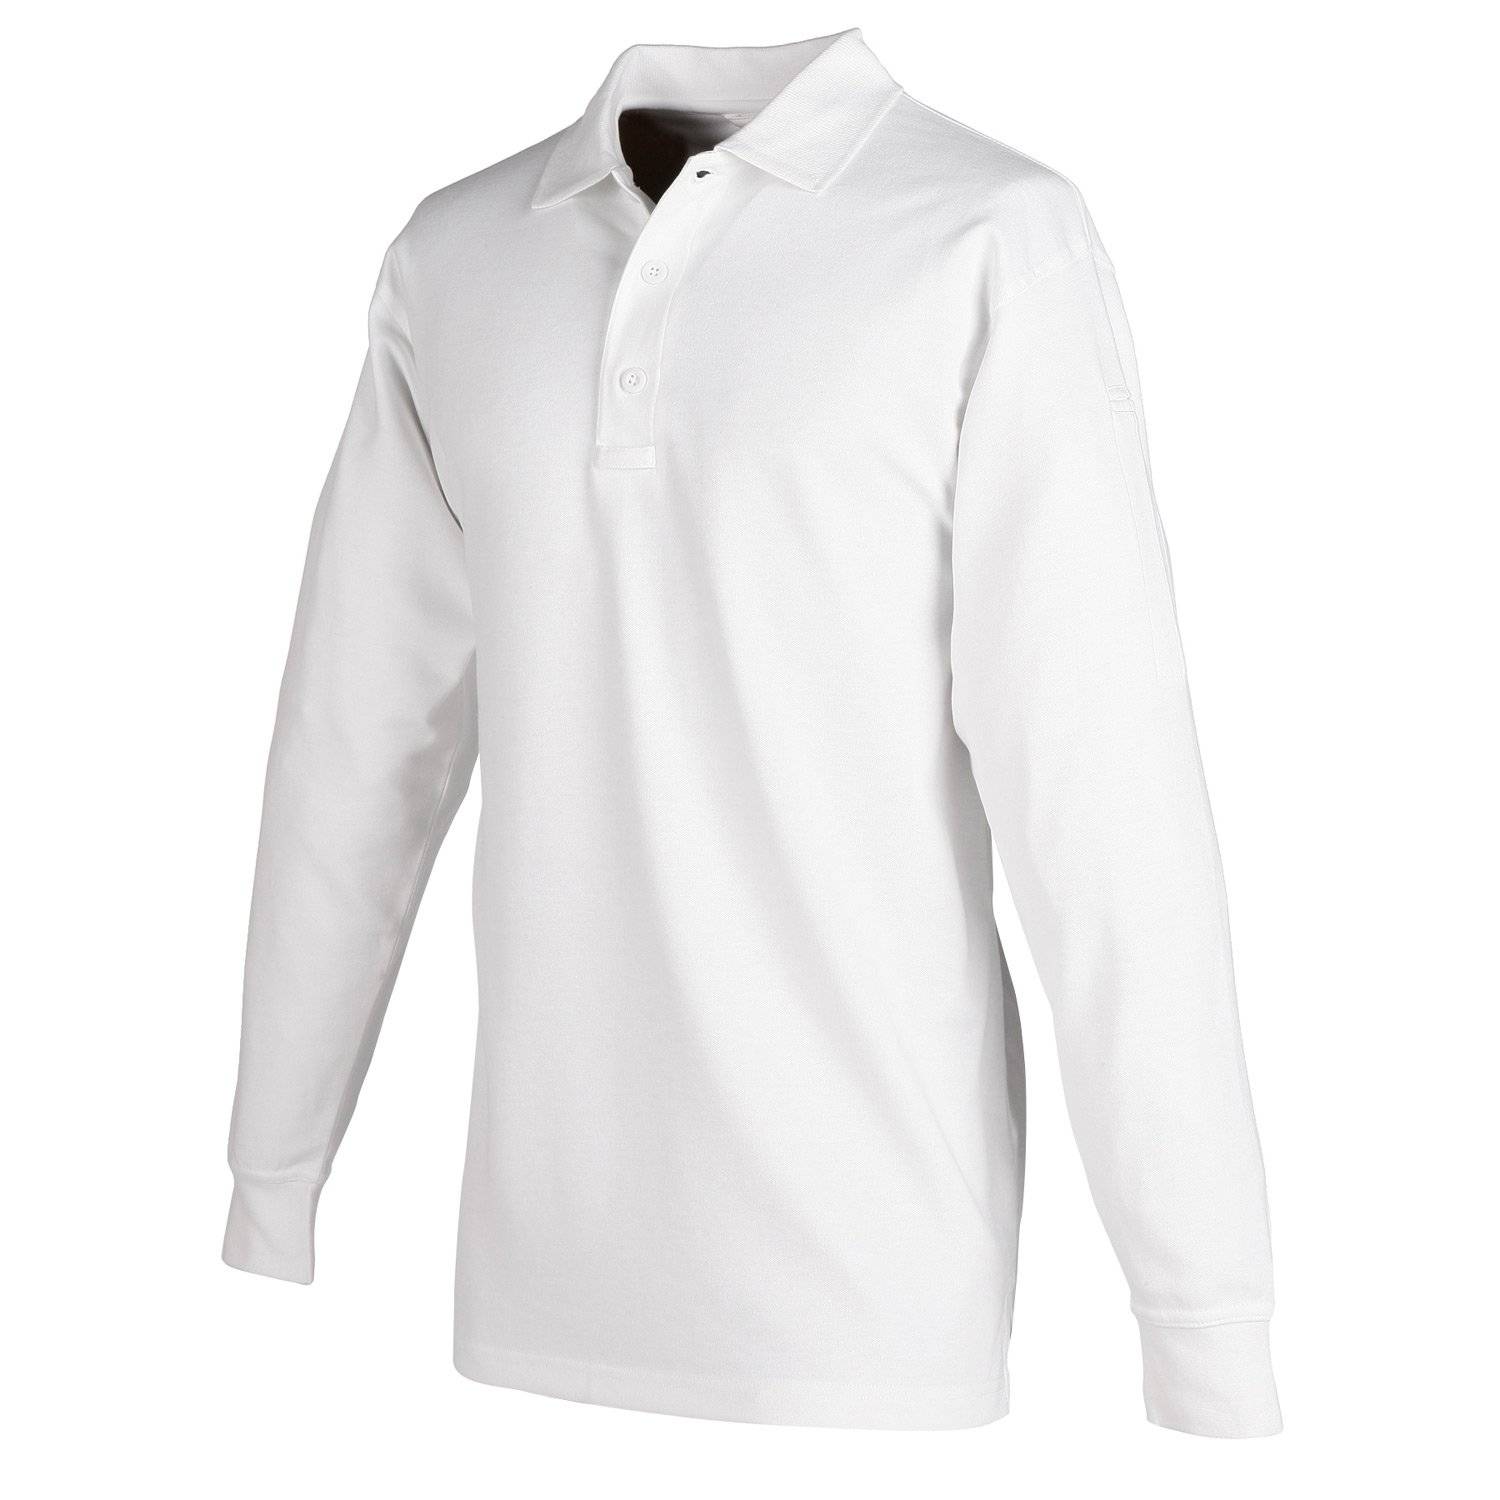 5.11 Tactical Long Sleeve Professional Polo